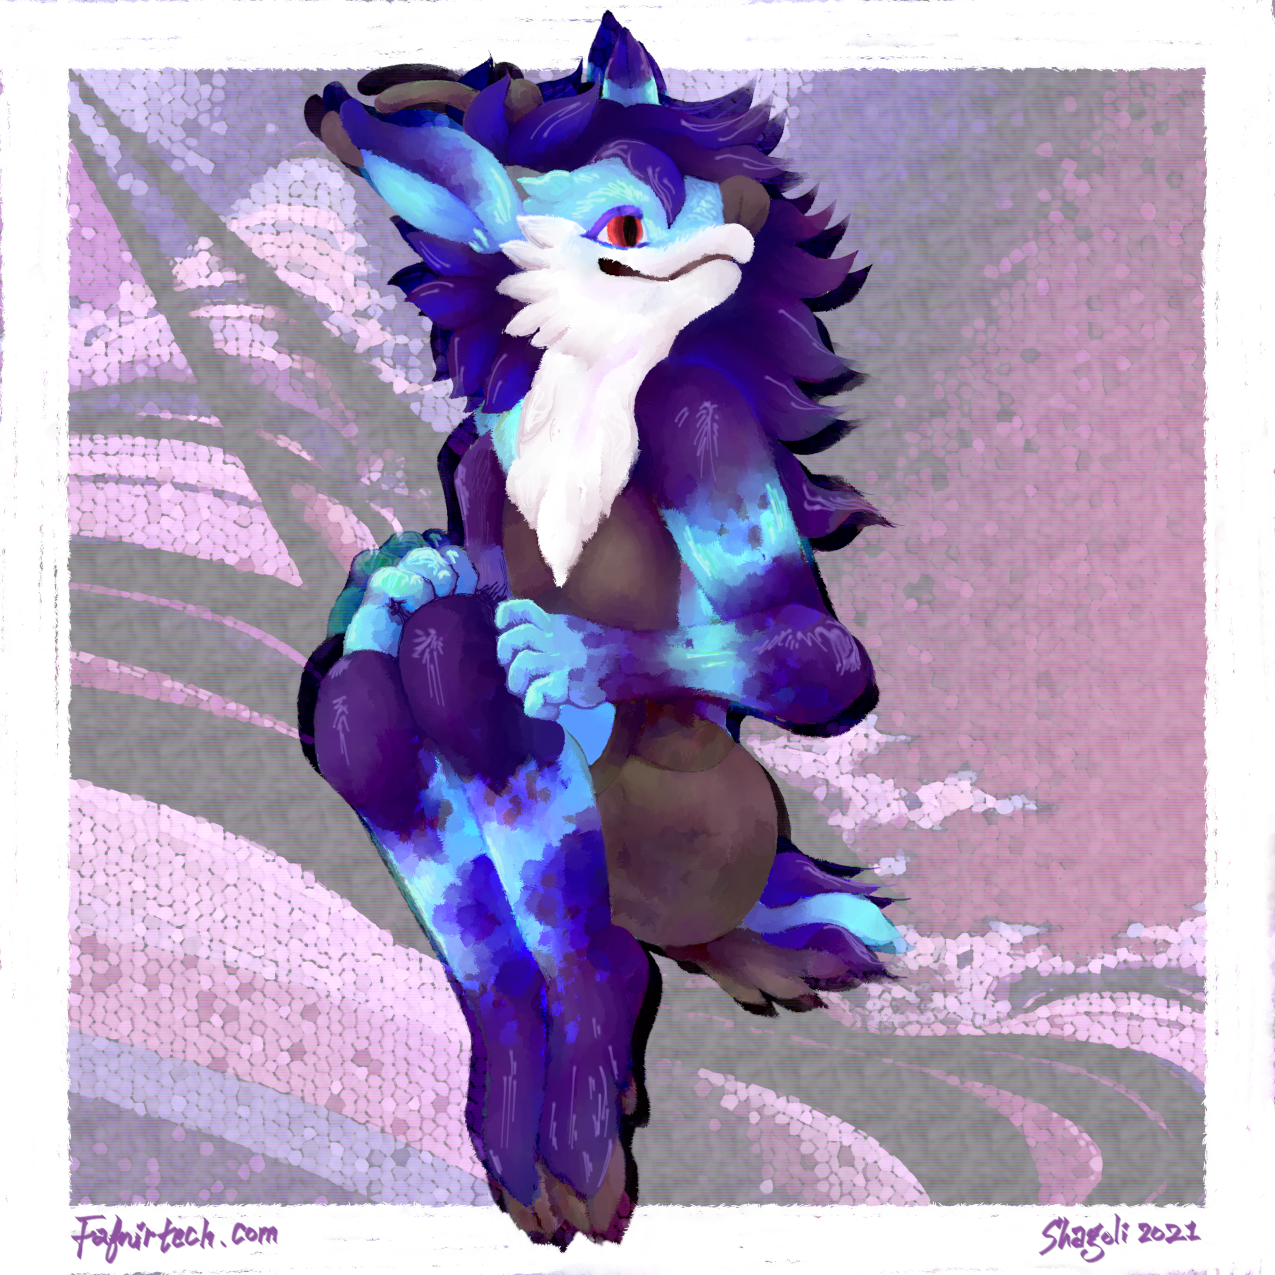 Painting of Garret, a blue and purple anthropomorphic deer, made for Art Fight 2021.